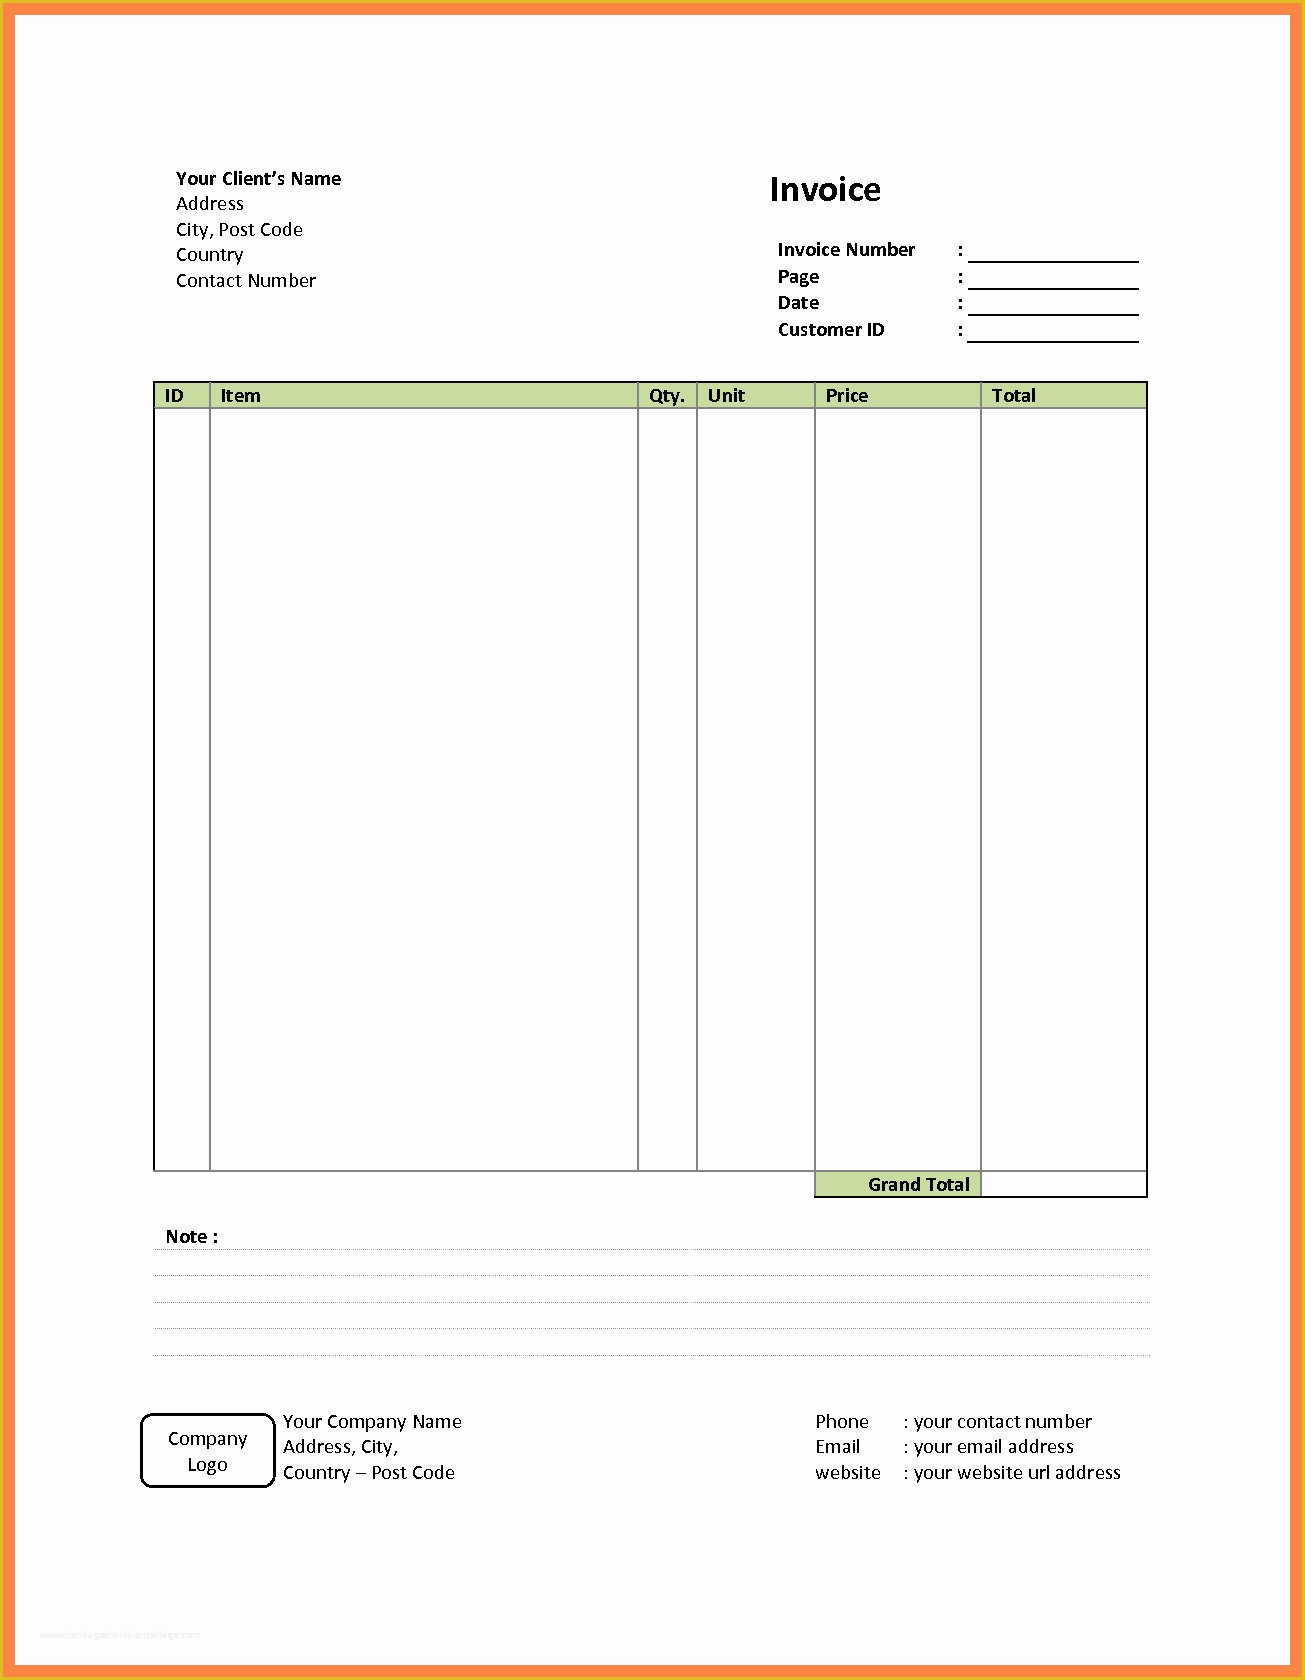 Fill In the Blank Invoice Template Free Of Get Invoice Simple